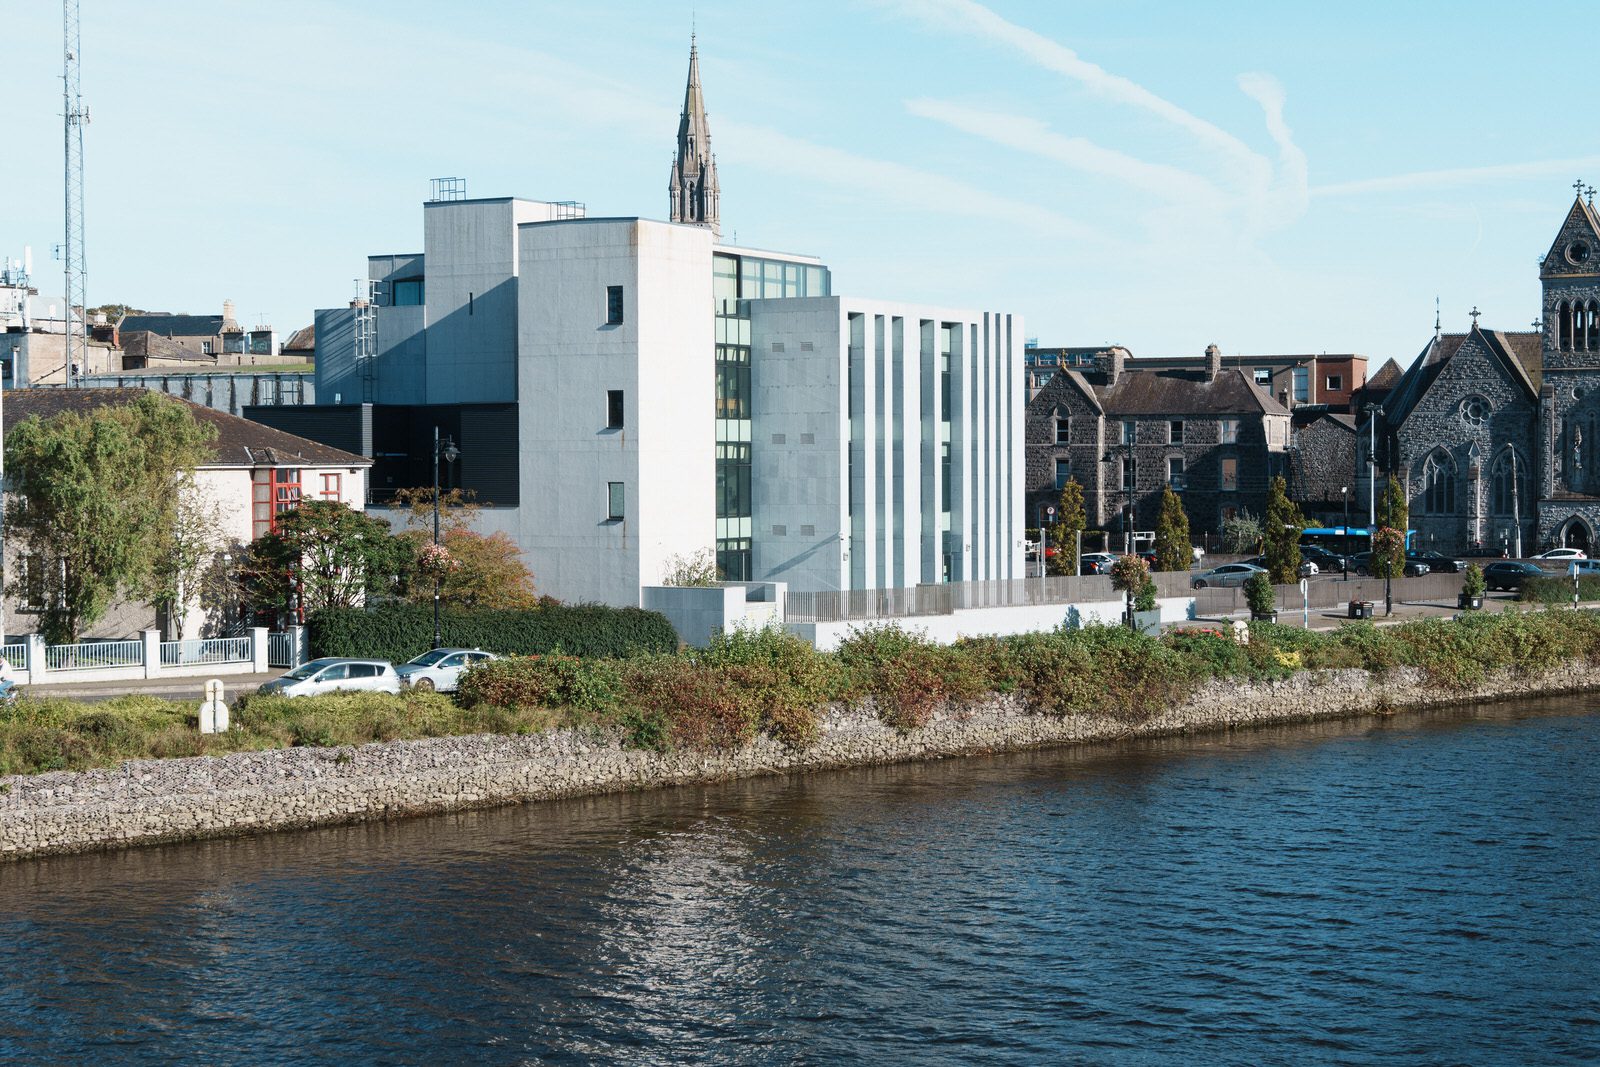 GARDA STATION AND NEW COURTHOUSE [IN CONTEXT WITHIN THE HISTORIC TOWN OF DROGHEDA]-224302-1